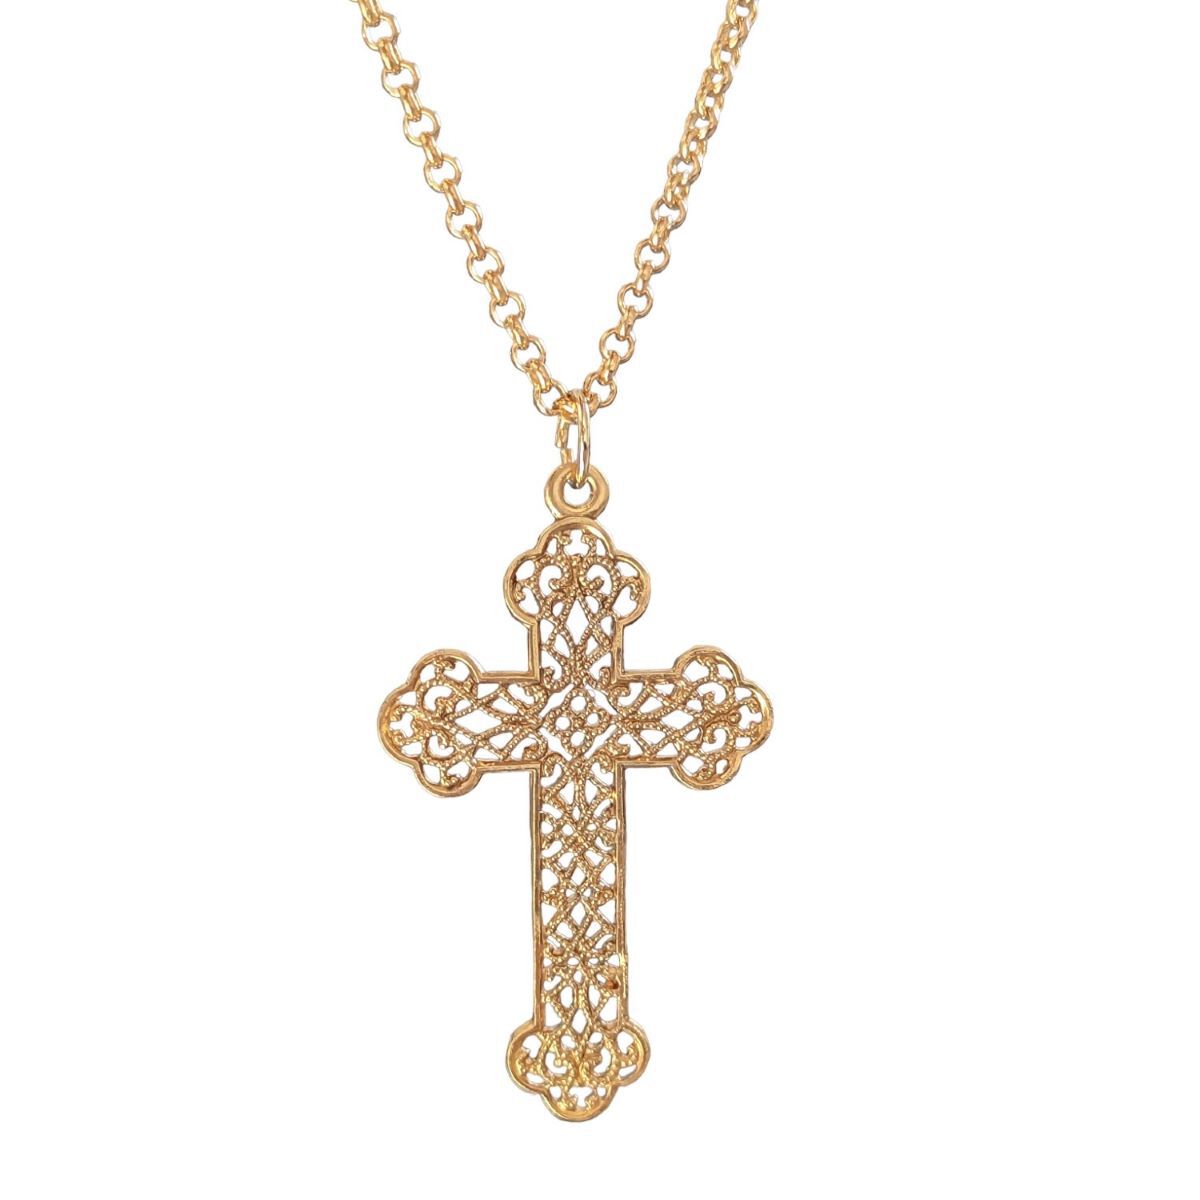 Cavenders | Accessories | Cavenders Tooled Leather Silver Cross Necklace  New Never Worn | Poshmark